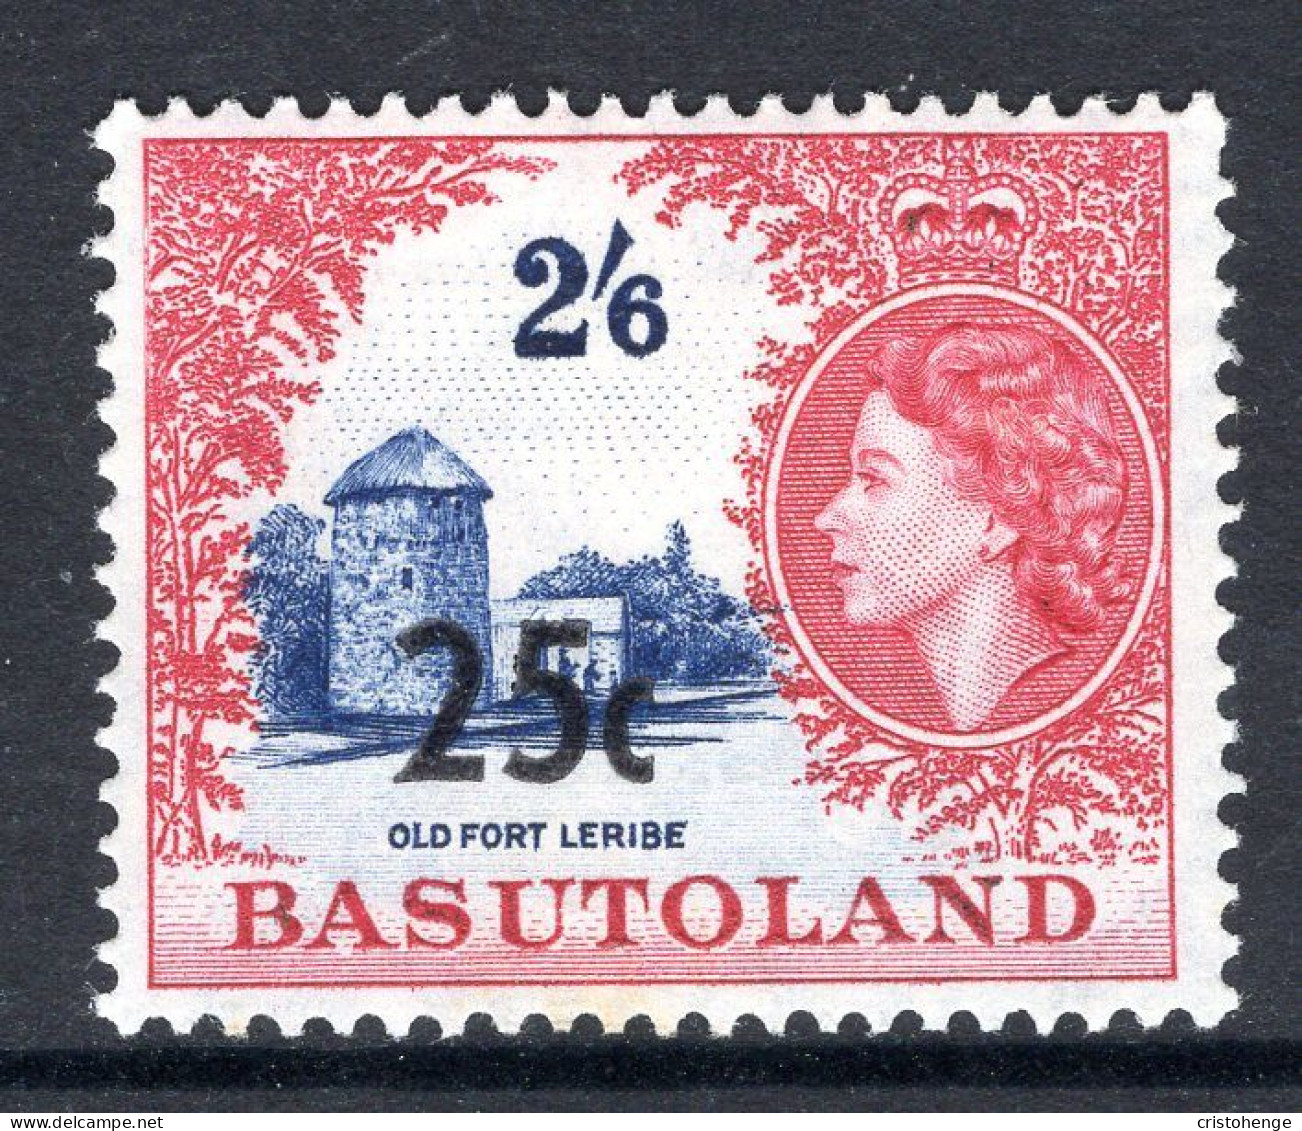 Basutoland 1961 Decimal Surcharges - 25c On 2/6 Old Fort Leribe - Type III - HM (SG 66b) - 1933-1964 Colonia Británica